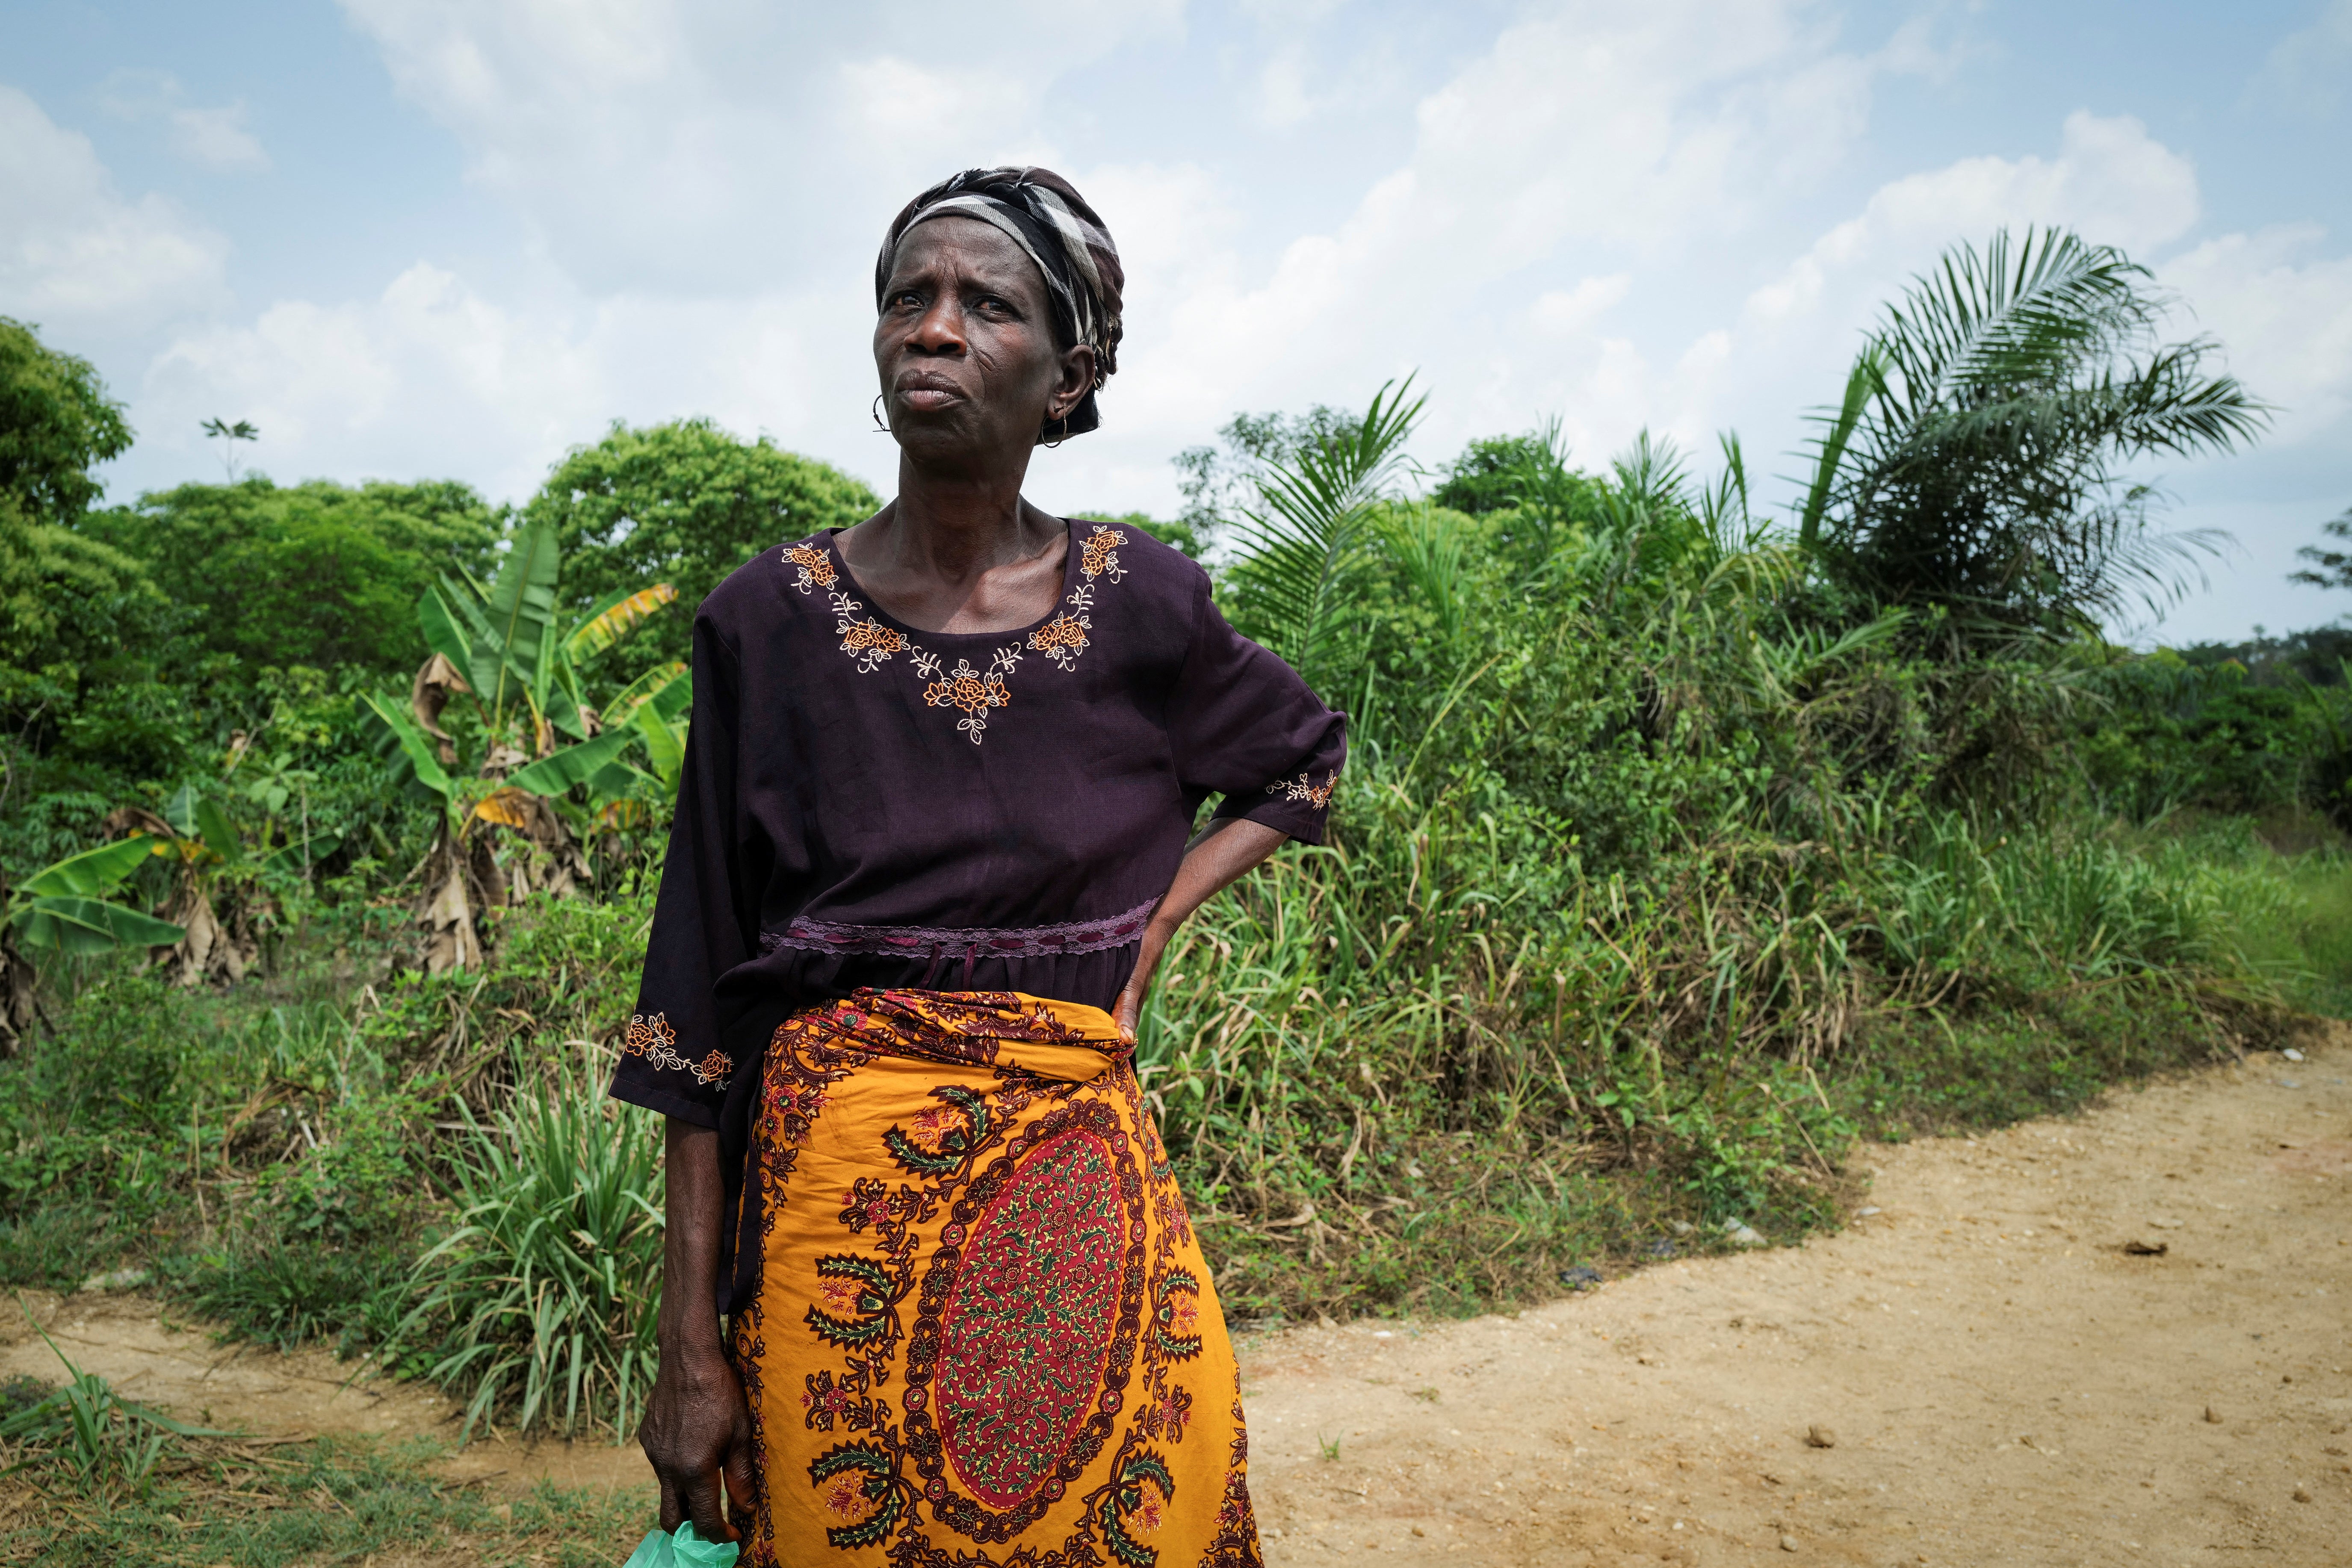 Felicia Gasikah, a cocoa farmer, stands at the edge of her land, which is threatened by gold mining